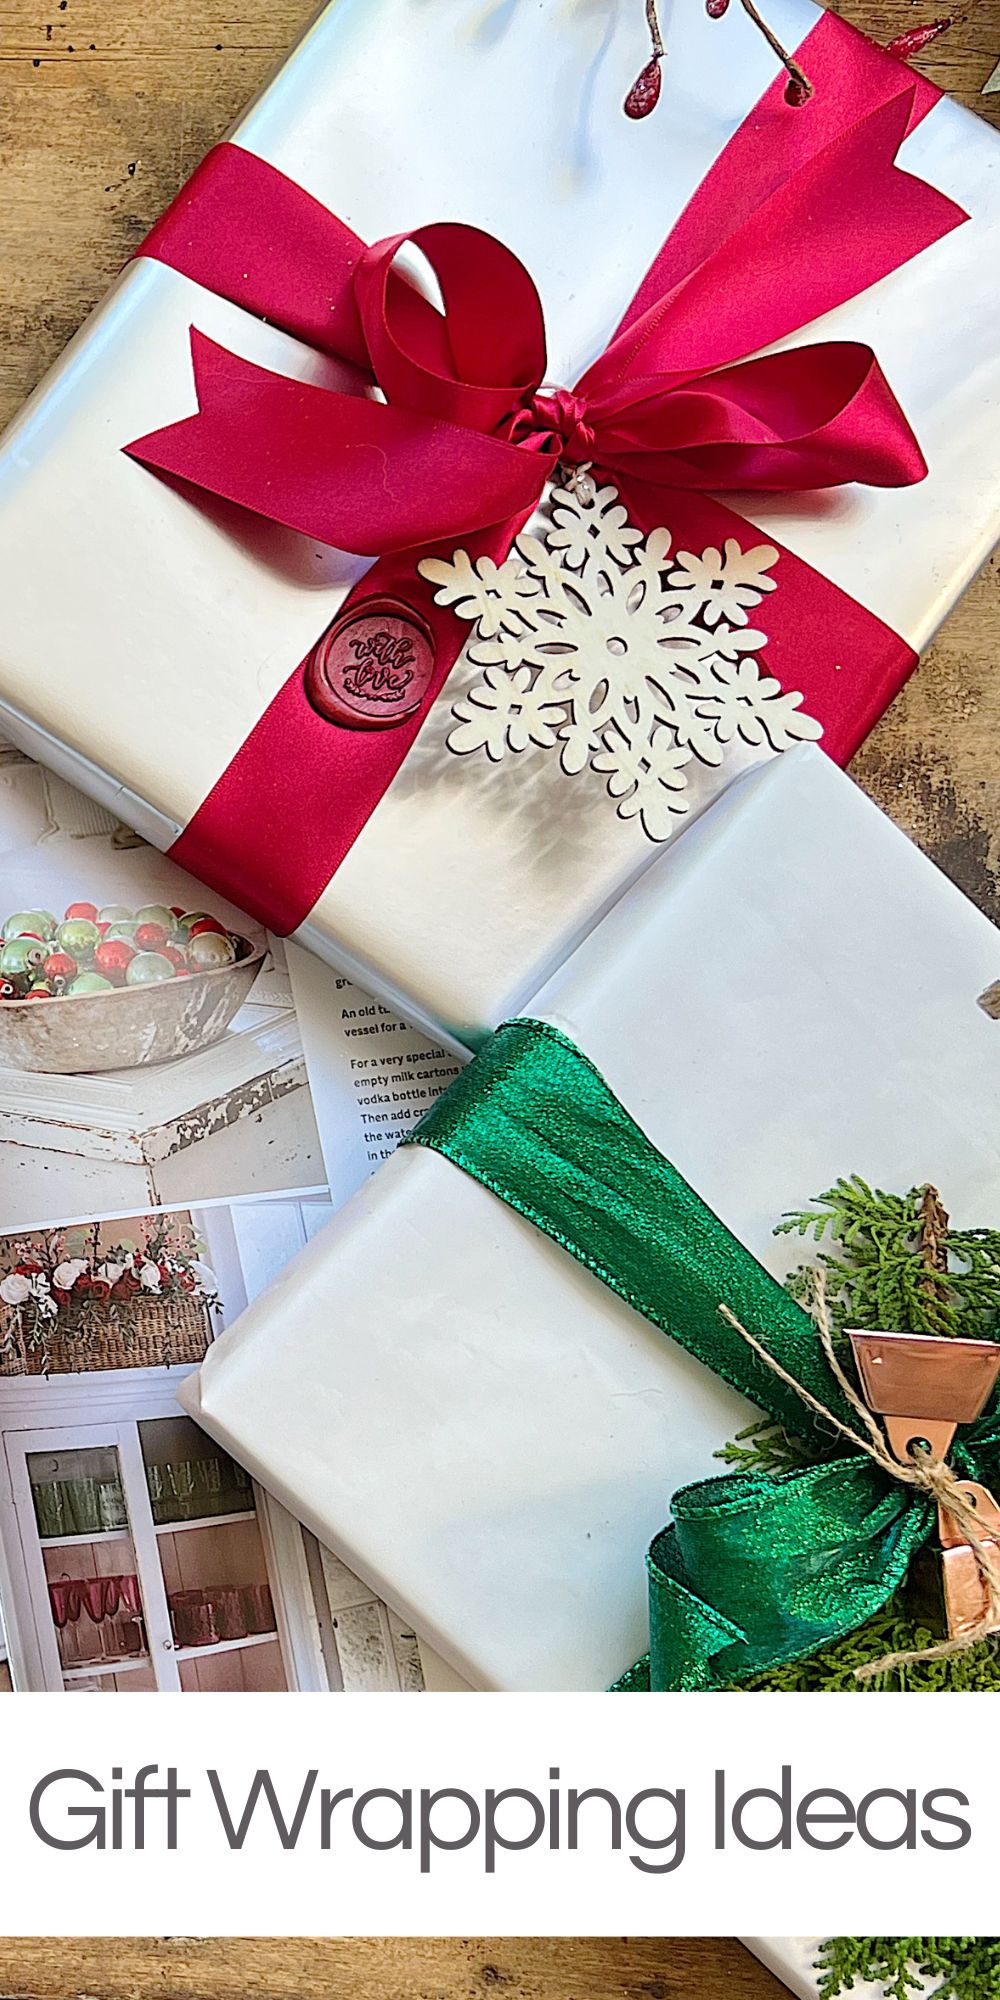 I am sharing all of my Amazon gift wrap ideas with you today so that you can get a head start on your Christmas wrapping too!